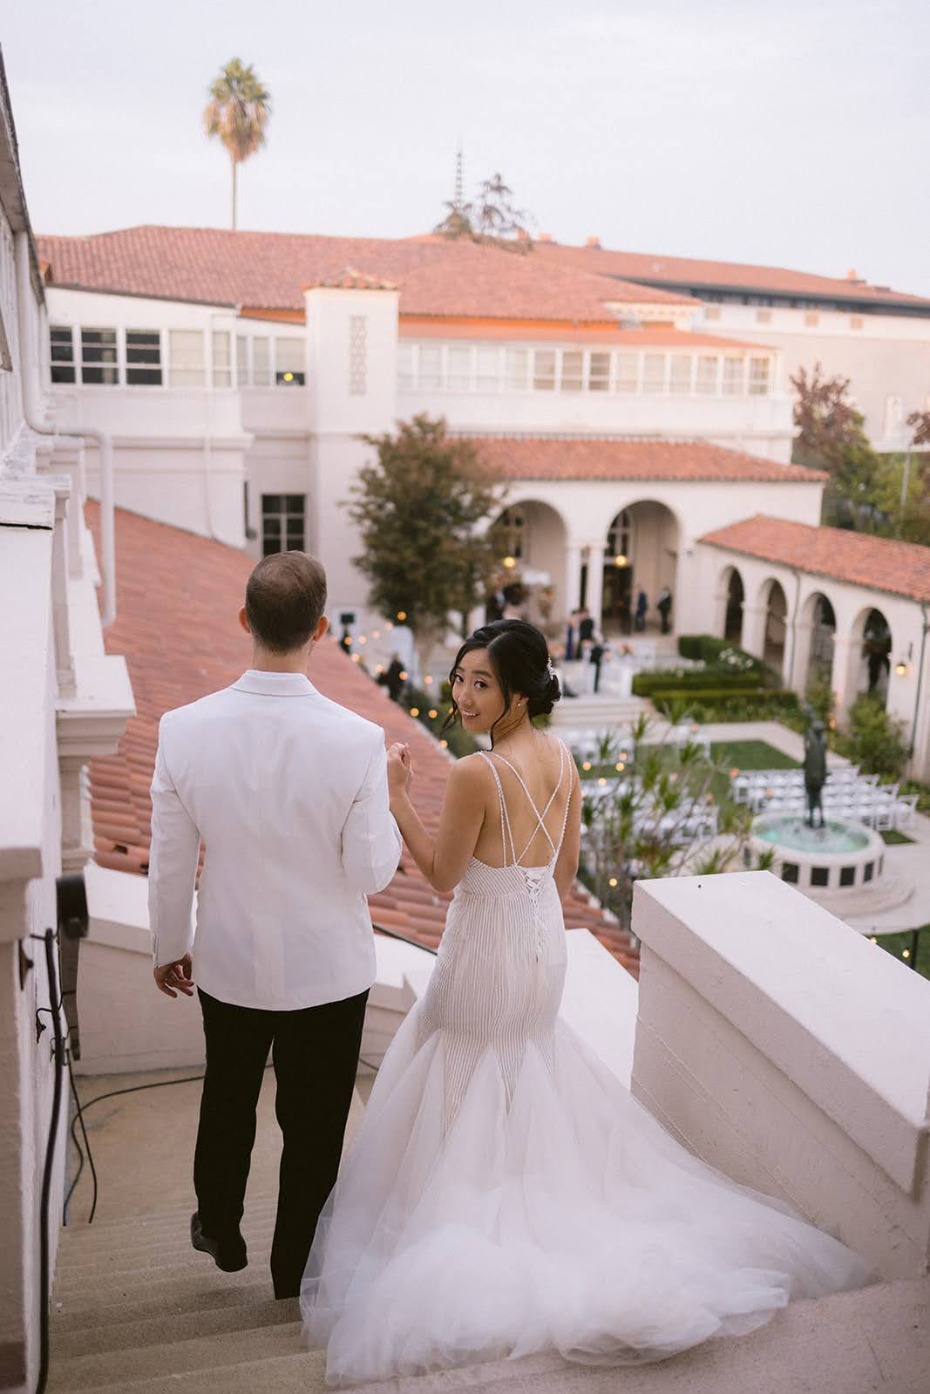 Hollywood Glamour Is the Name of the Game at This Los Angeles Wedding Venue